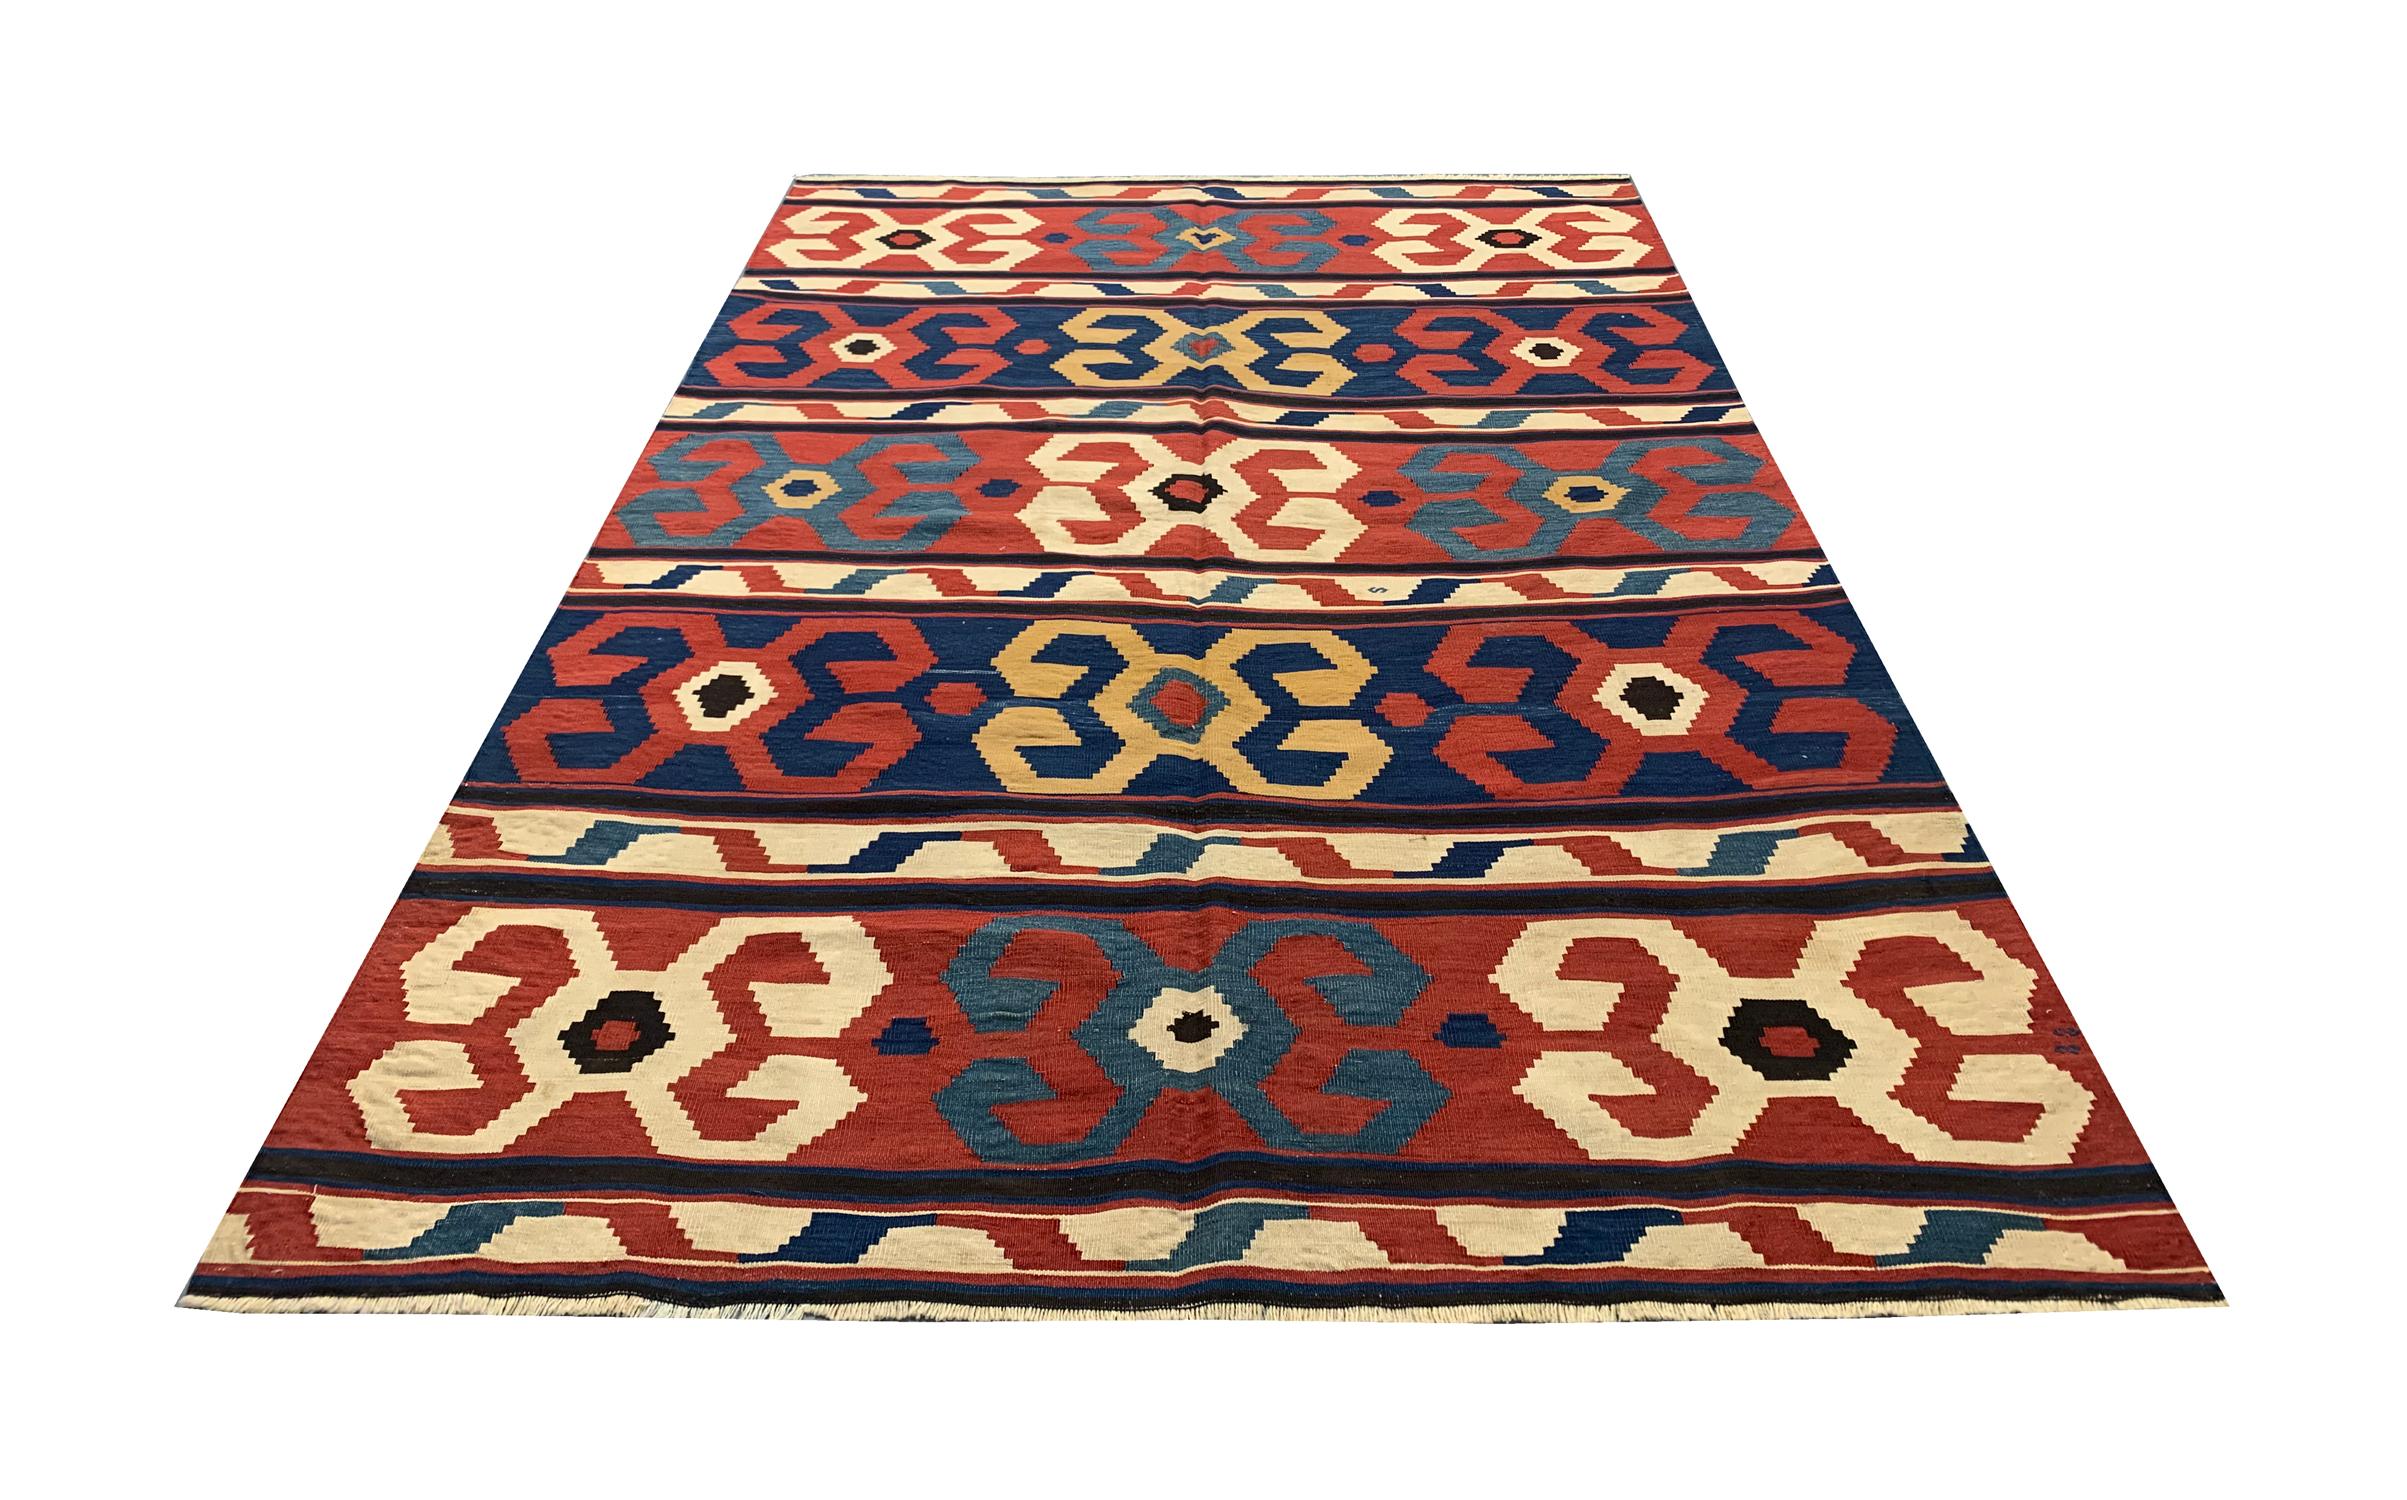 This antique wool rug has been woven to perfection on looms of master weavers of Turkey in the 1920s. The design features a repeat motif pattern that has been woven by hand to create this all-over design. Red, cream and blue make up the main colors